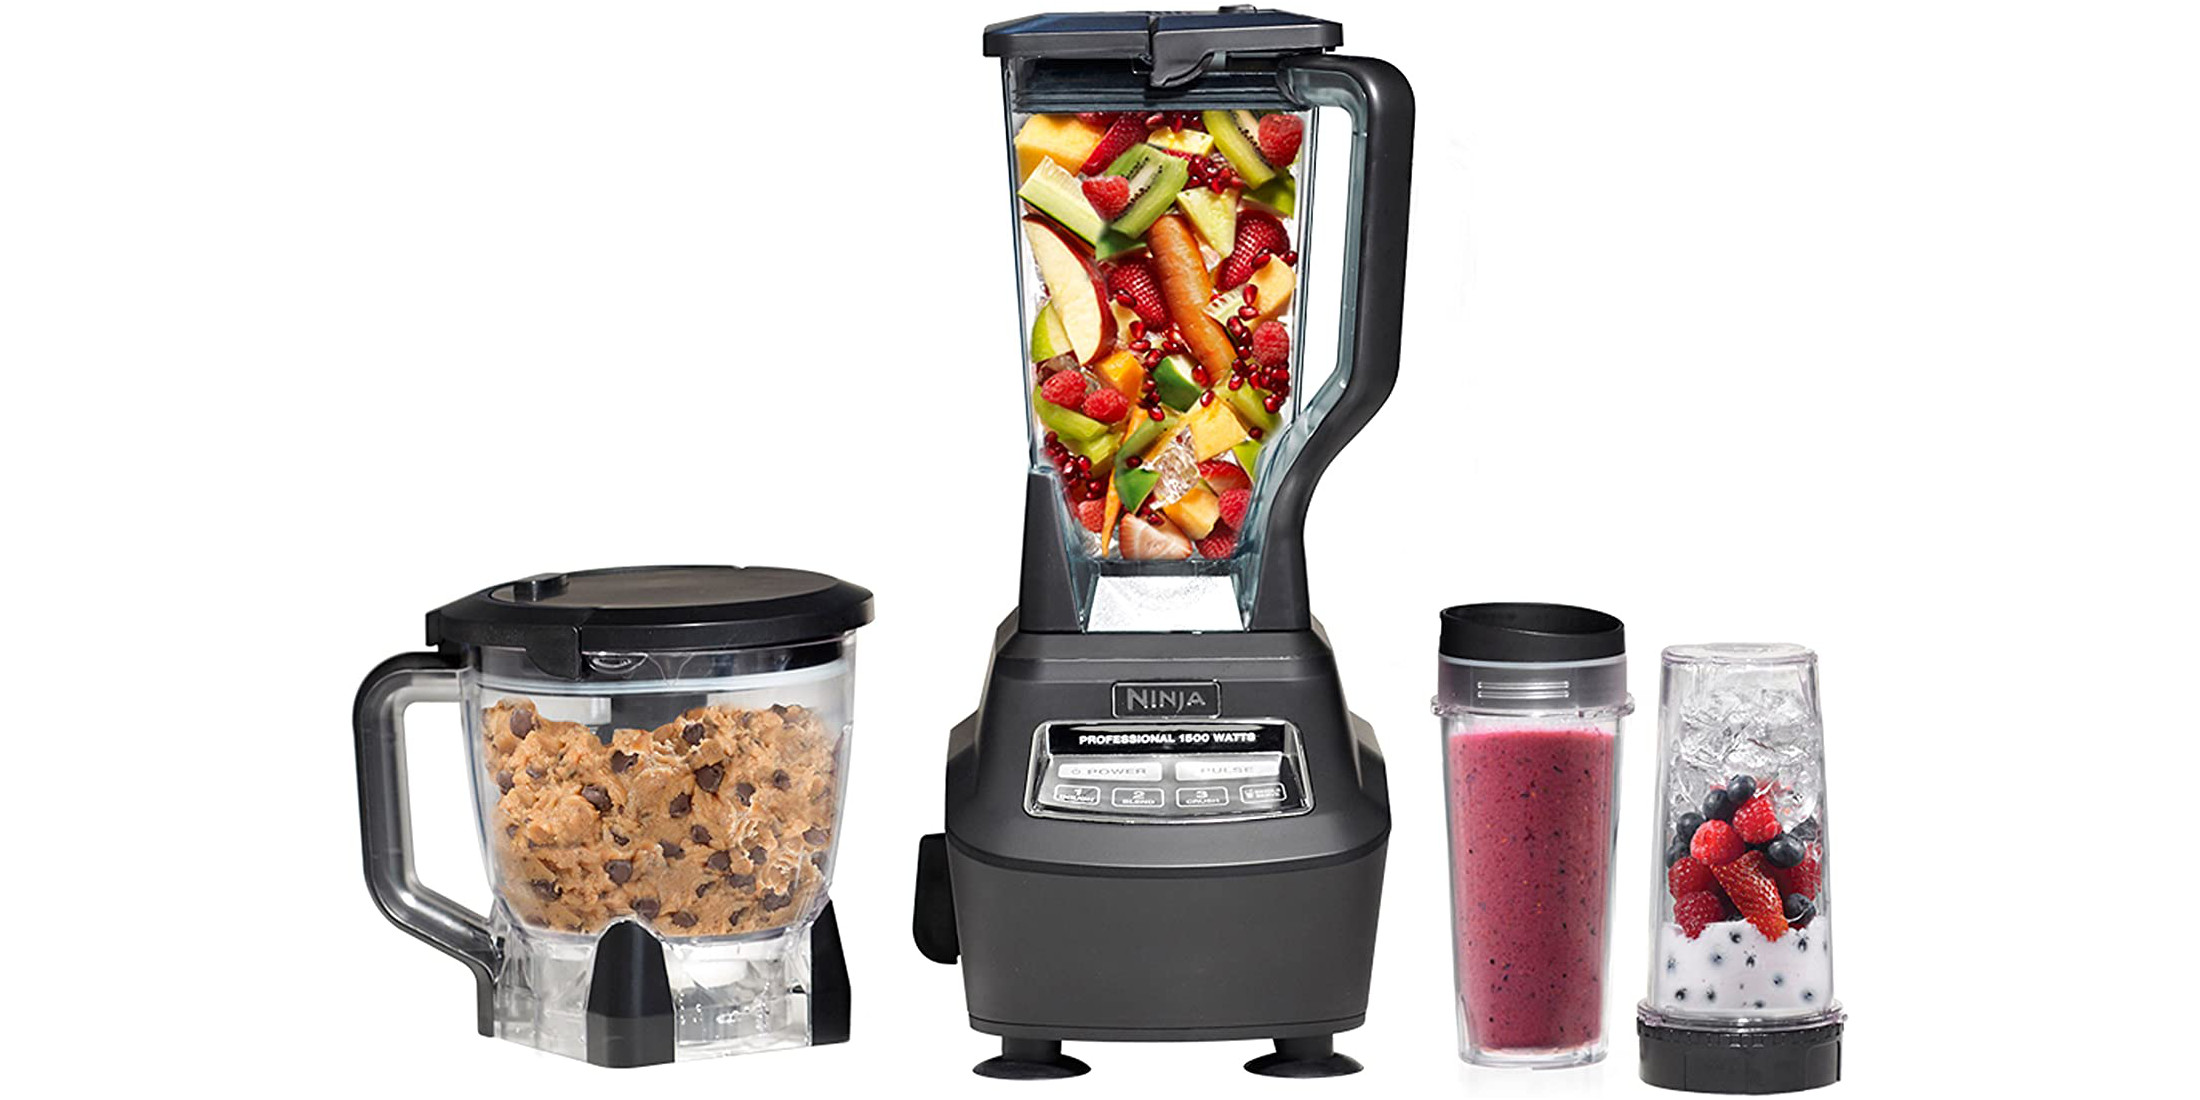 How to Assemble and Use the Ninja® Professional Food Processor 